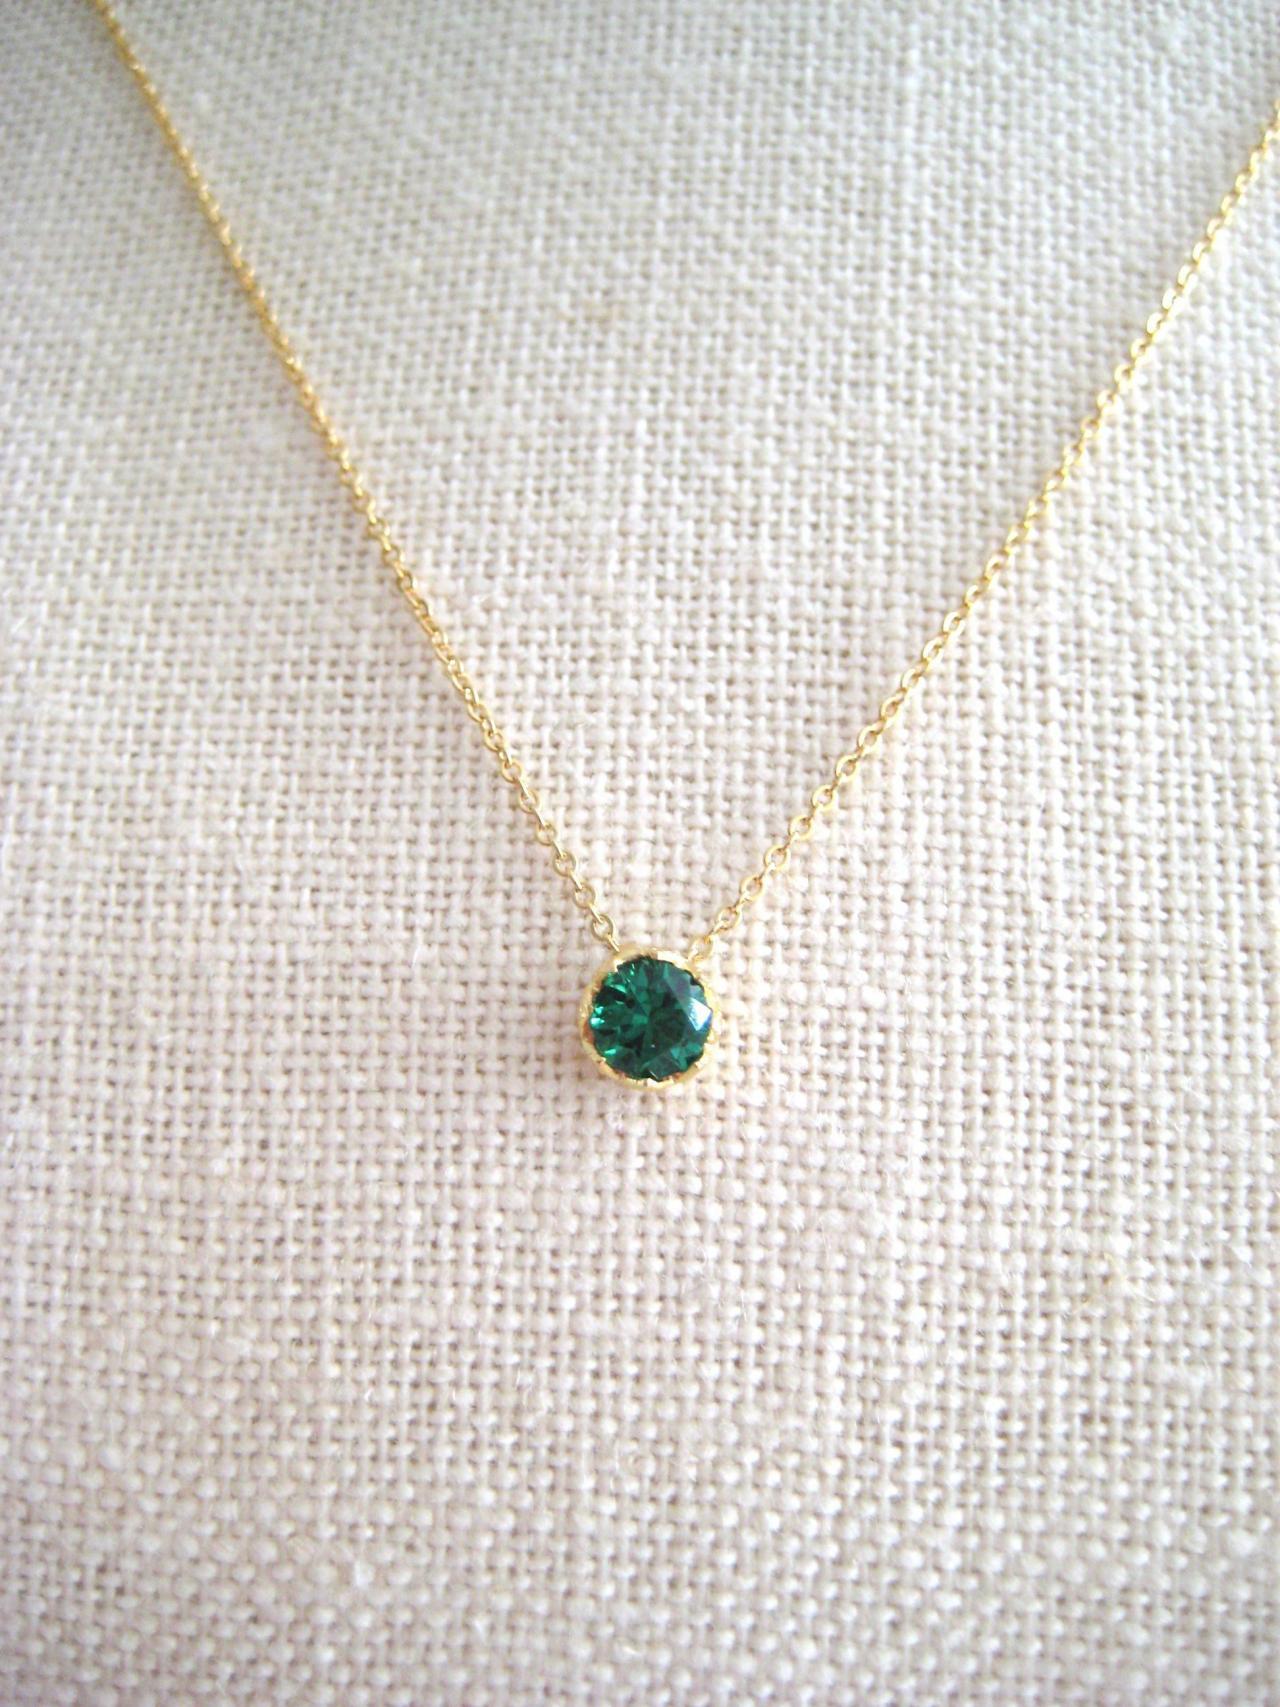 Emerald Green Crystal Charm Necklace May Birthday Stone Necklace Wedding Pendant Minimalist Jewelry Christmas Gift Gold Earrings (n106)